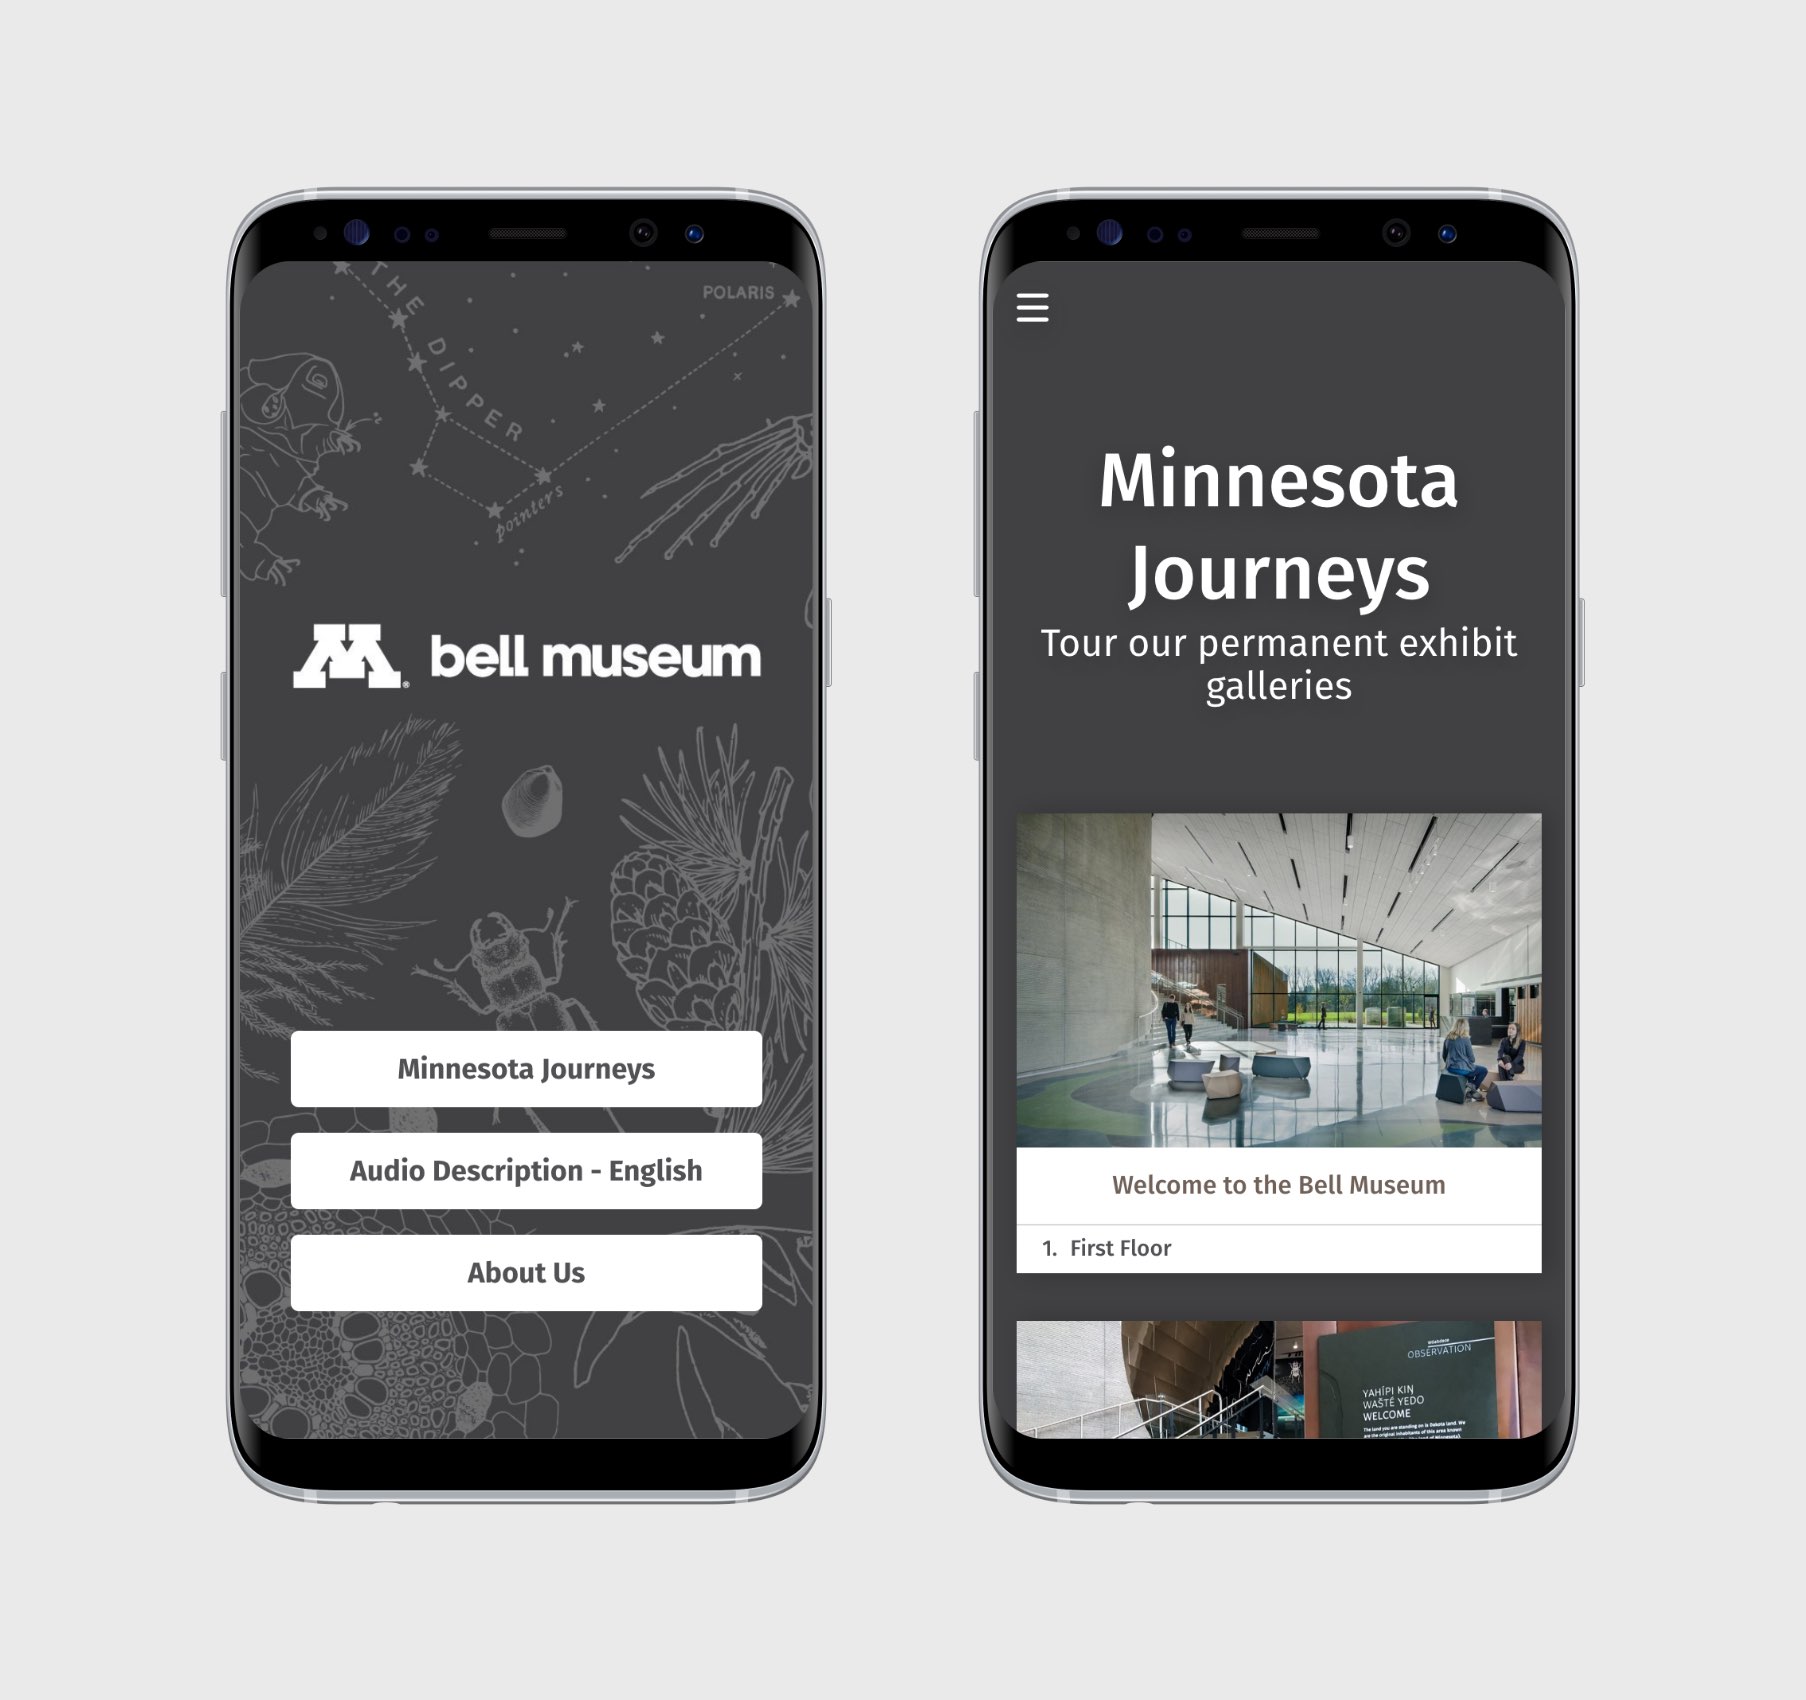 Two screenshots of the Bell Museum mobile guide. One displays the app home page and the other displays the first stop on the Minnesota Journeys tour.